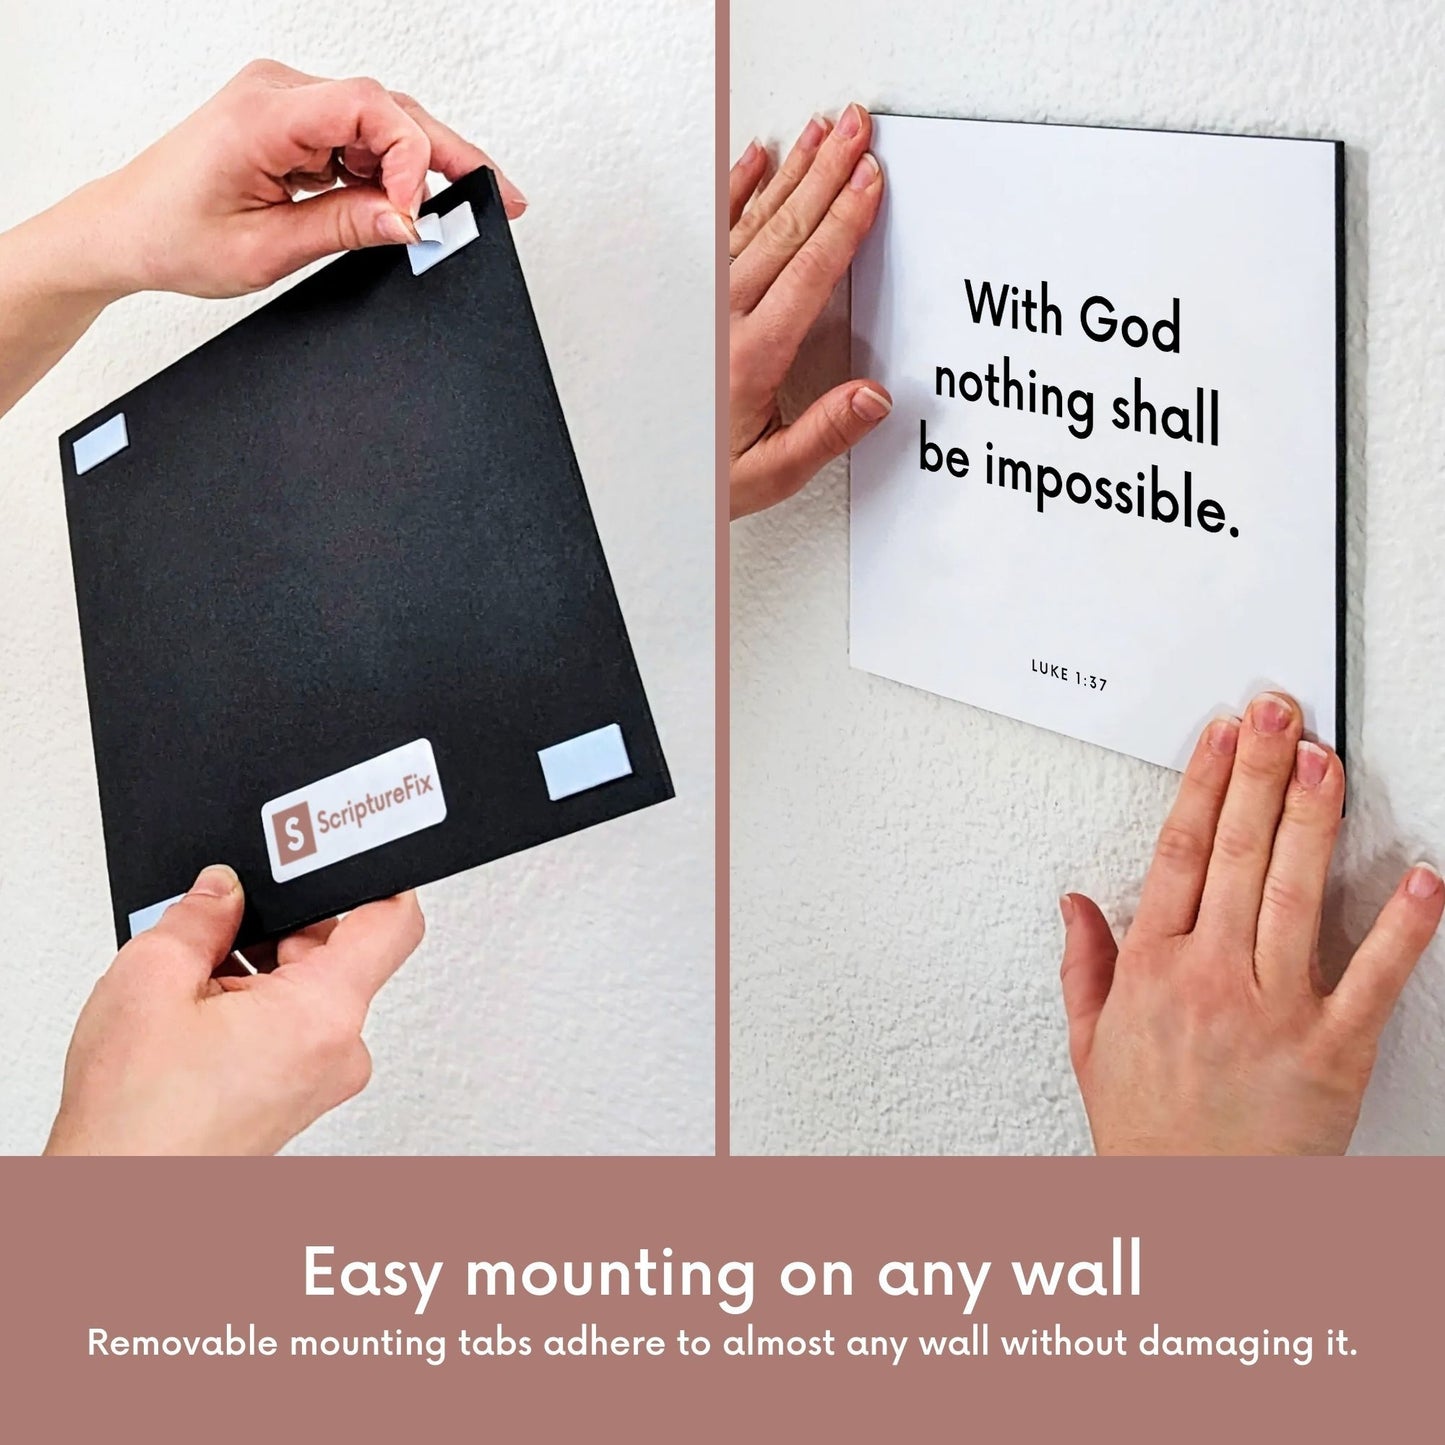 Mounting of scripture tile for Luke 1:37 - "With God nothing shall be impossible"